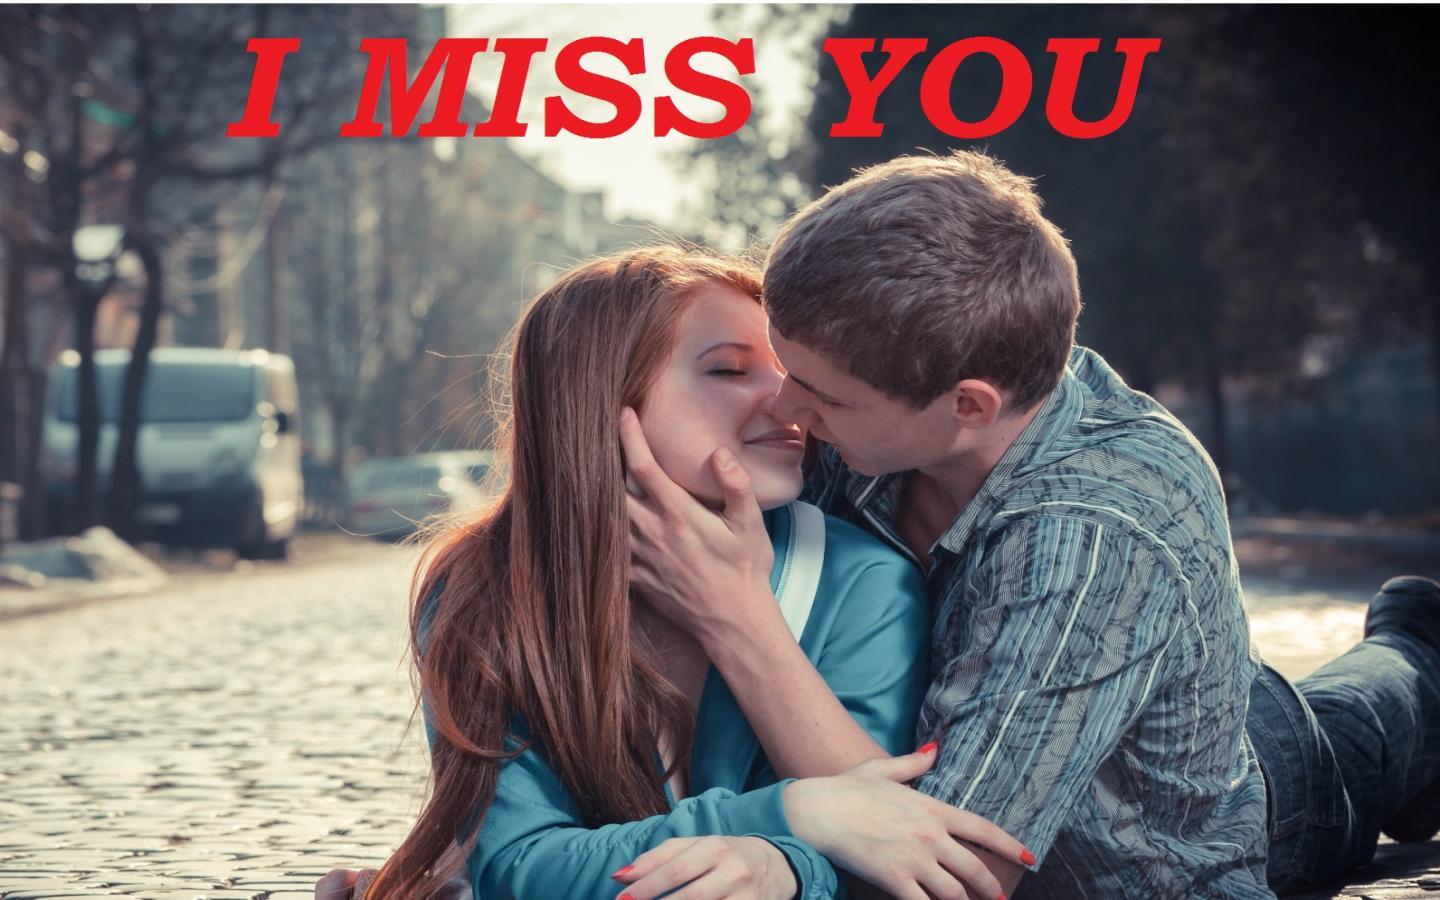 i miss u image with girl and boy kissing 1440x900 resolution